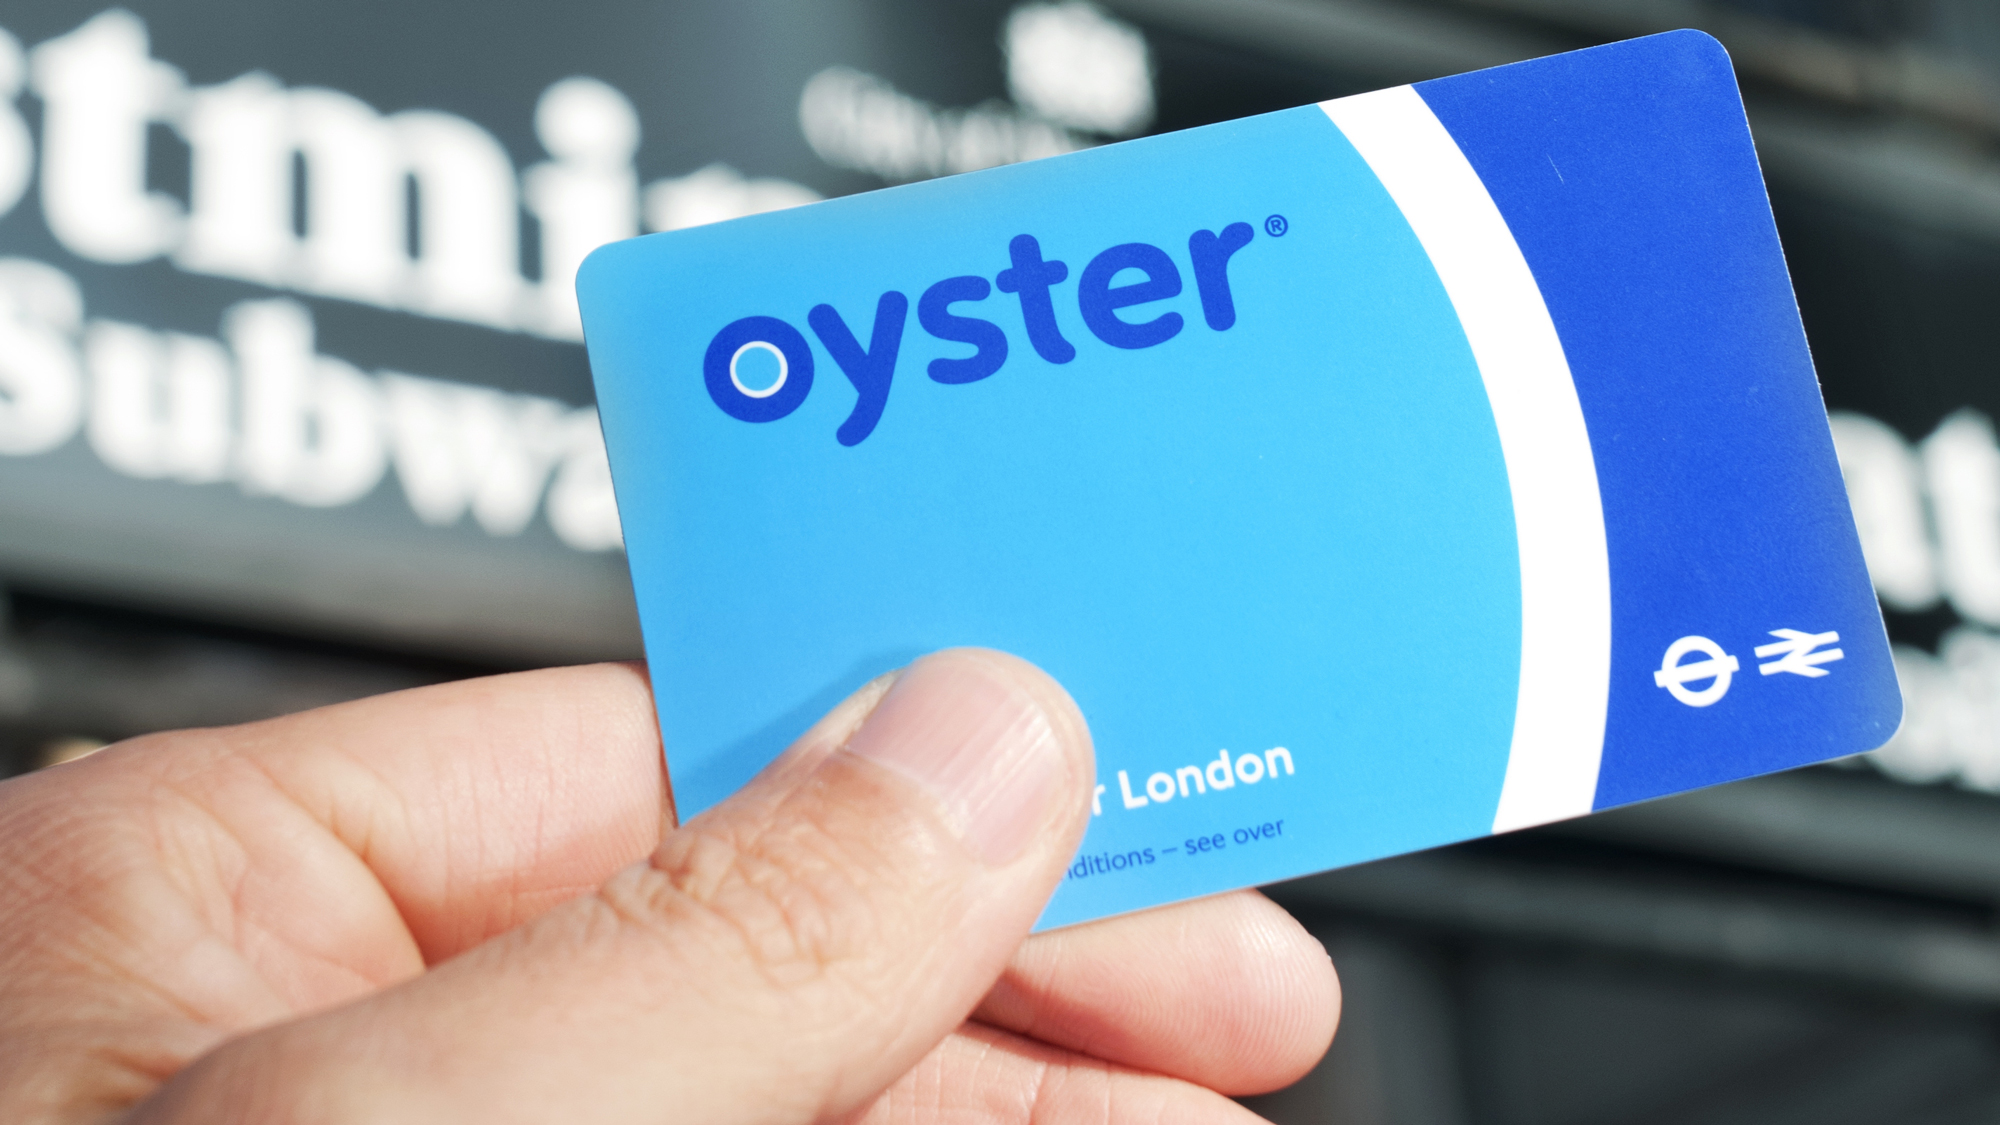 travel card and oyster